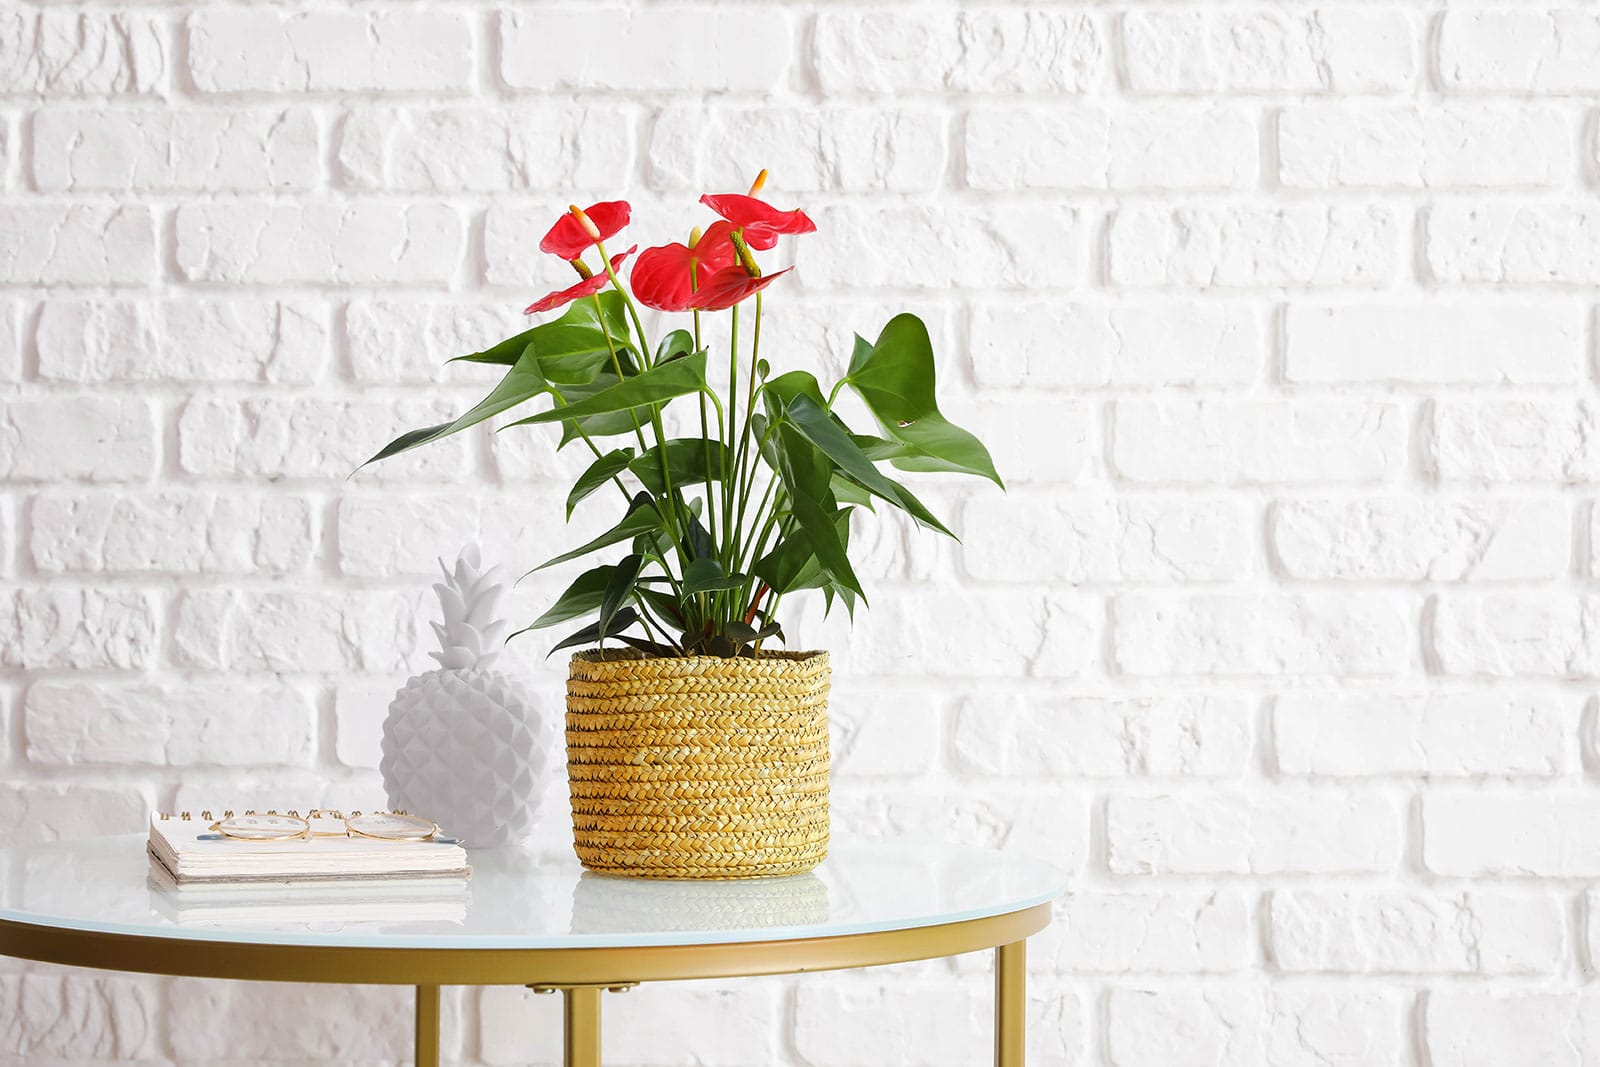 Red Anthurium (flamingo lily) houseplant in a woven straw basket with a painted white brick wall in the background